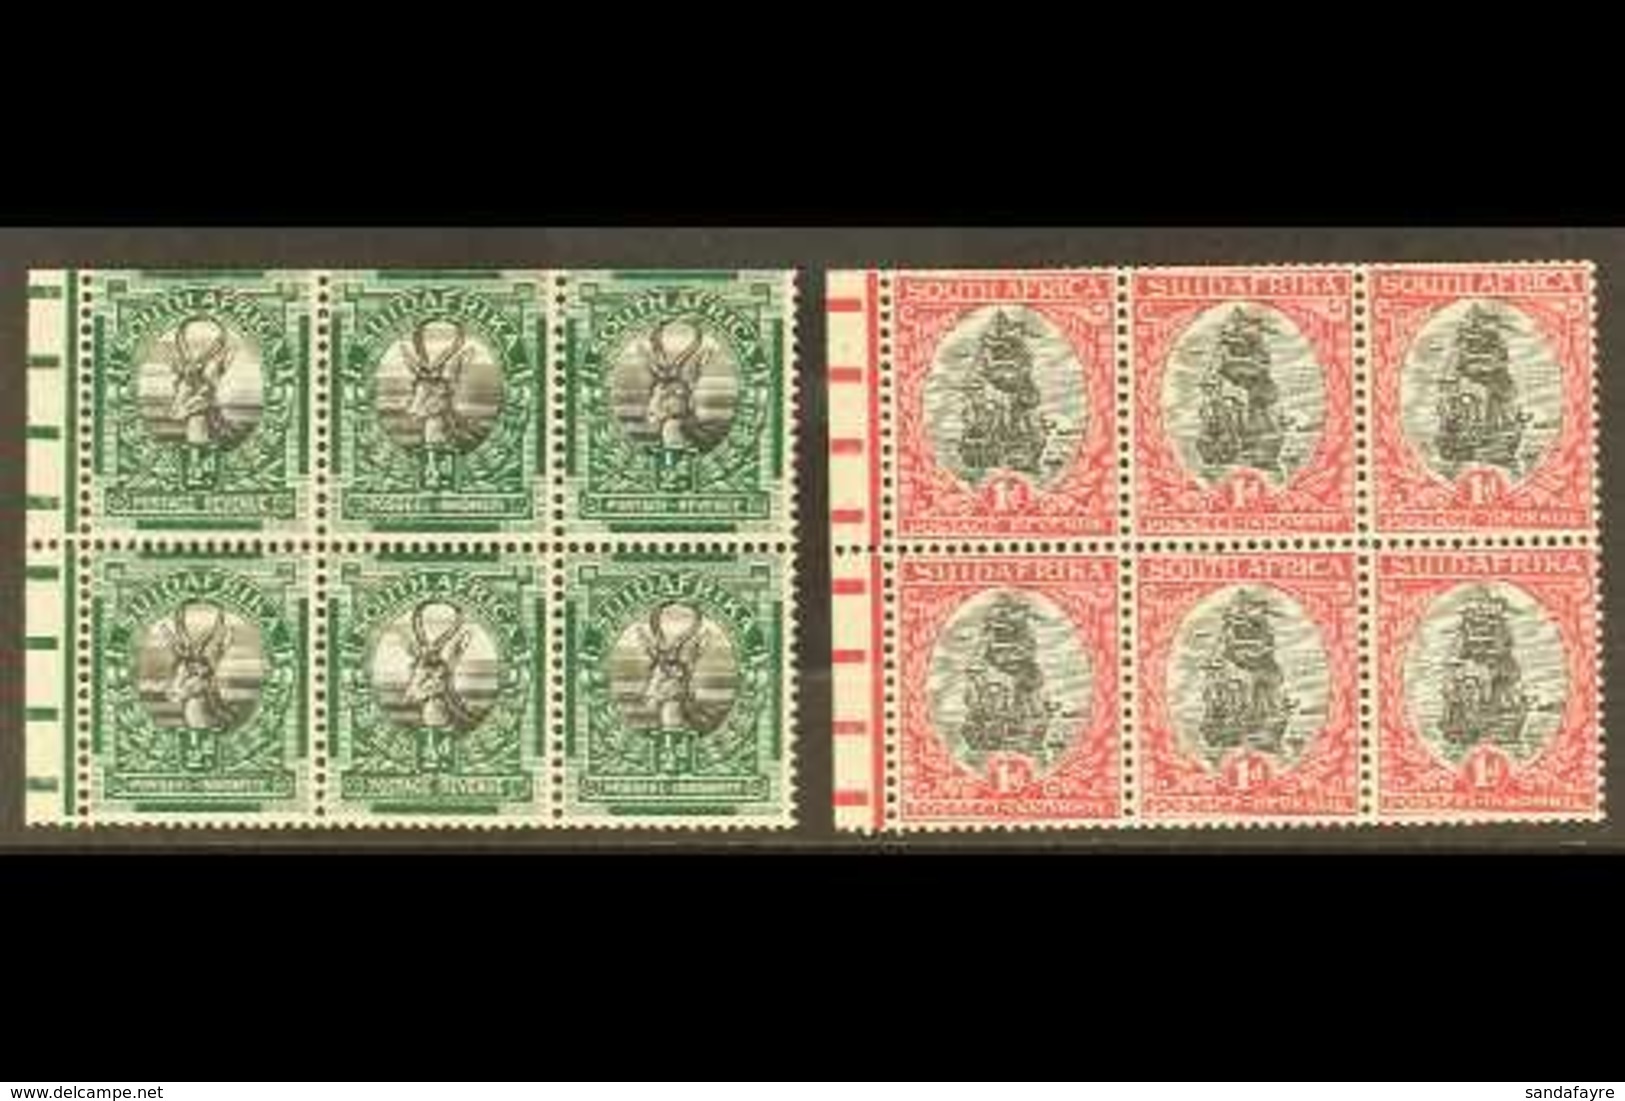 \Y BOOKLET PANES\Y 1926 ½d & 1d Booklet Panes Of 6, Both Watermark Inverted, London Printings, SG 30cw, 31dw, Ex SG SB5, - Non Classés